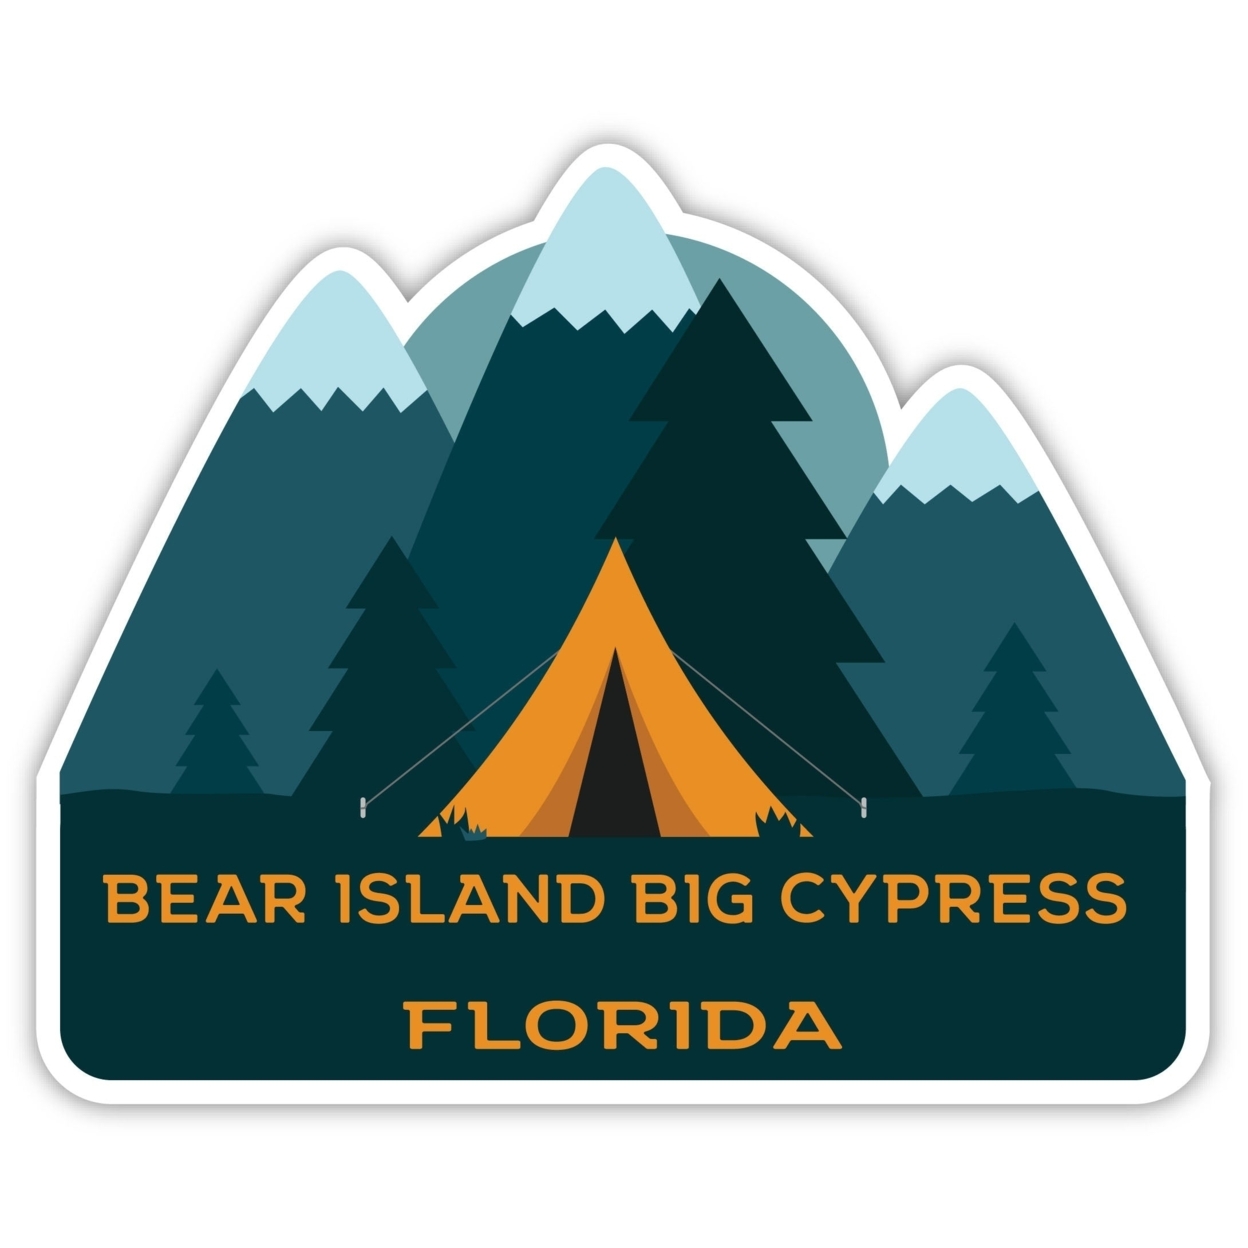 Bear Island Big Cypress Florida Souvenir Decorative Stickers (Choose Theme And Size) - 4-Pack, 8-Inch, Tent